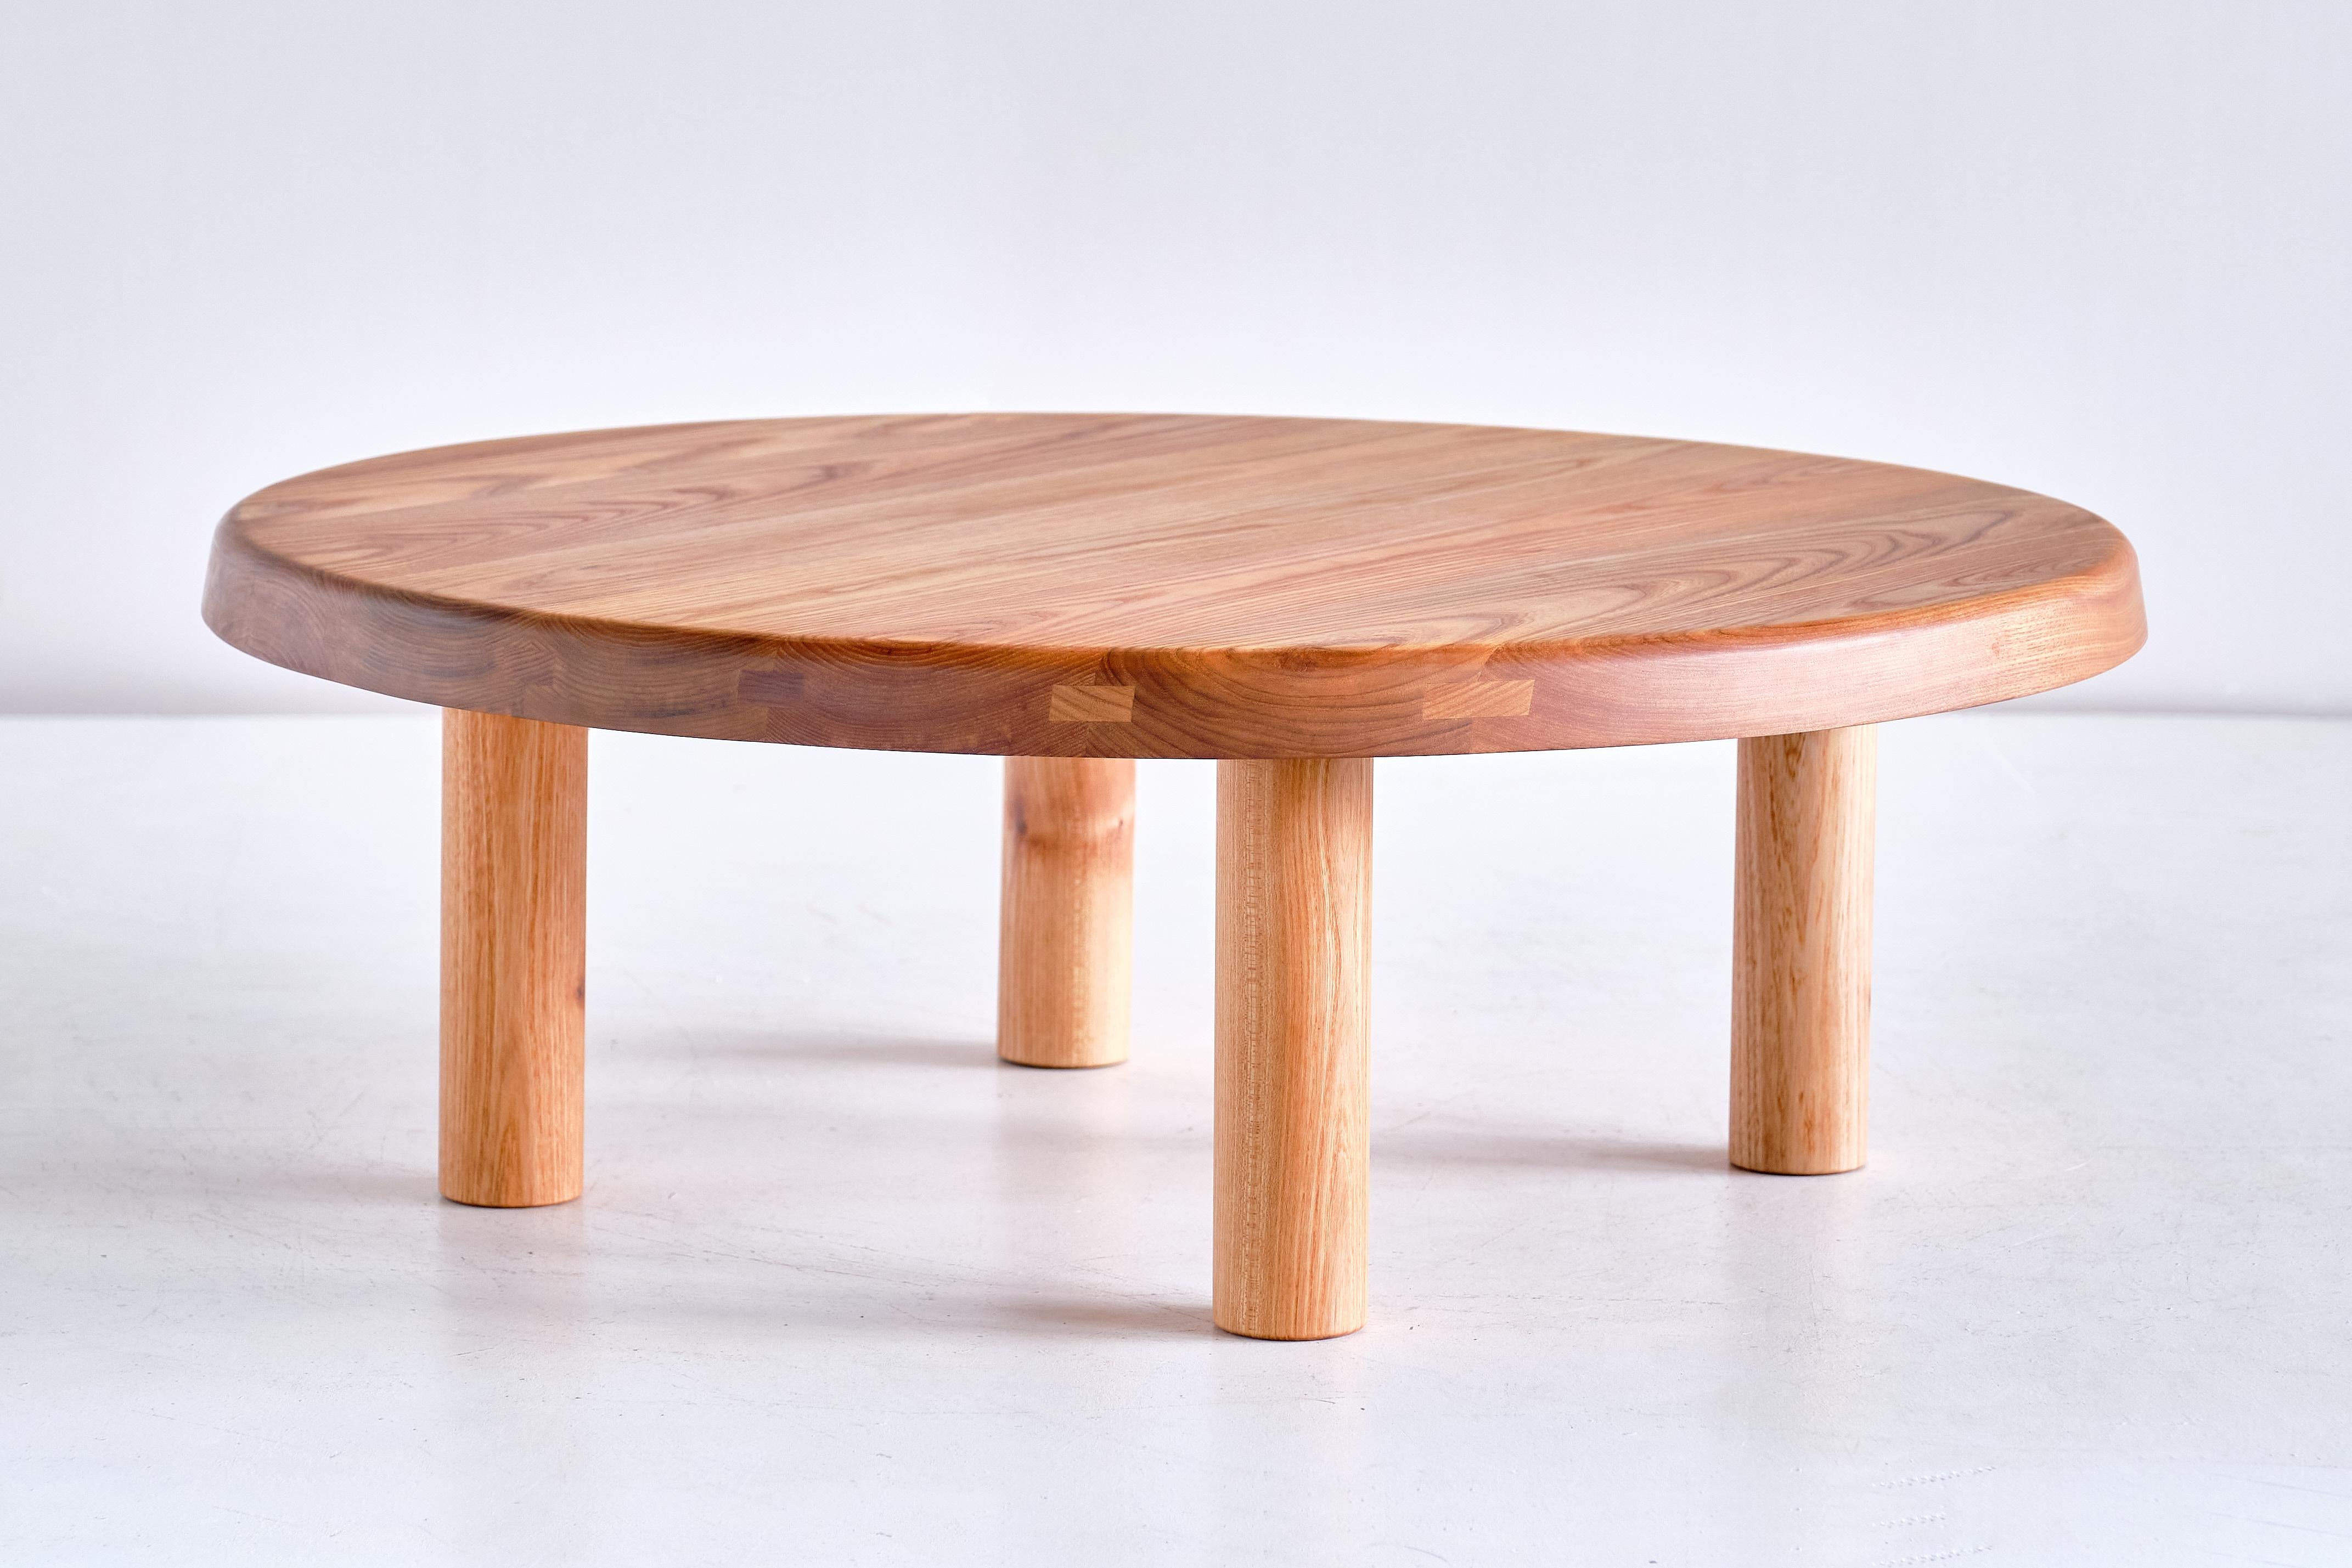 This striking coffee table is the model T02M designed by Pierre Chapo in 1963. The table is made of solid elm wood with a beautiful grain. The table can easily be converted into a dining table as the legs can be unscrewed from the top and replaced